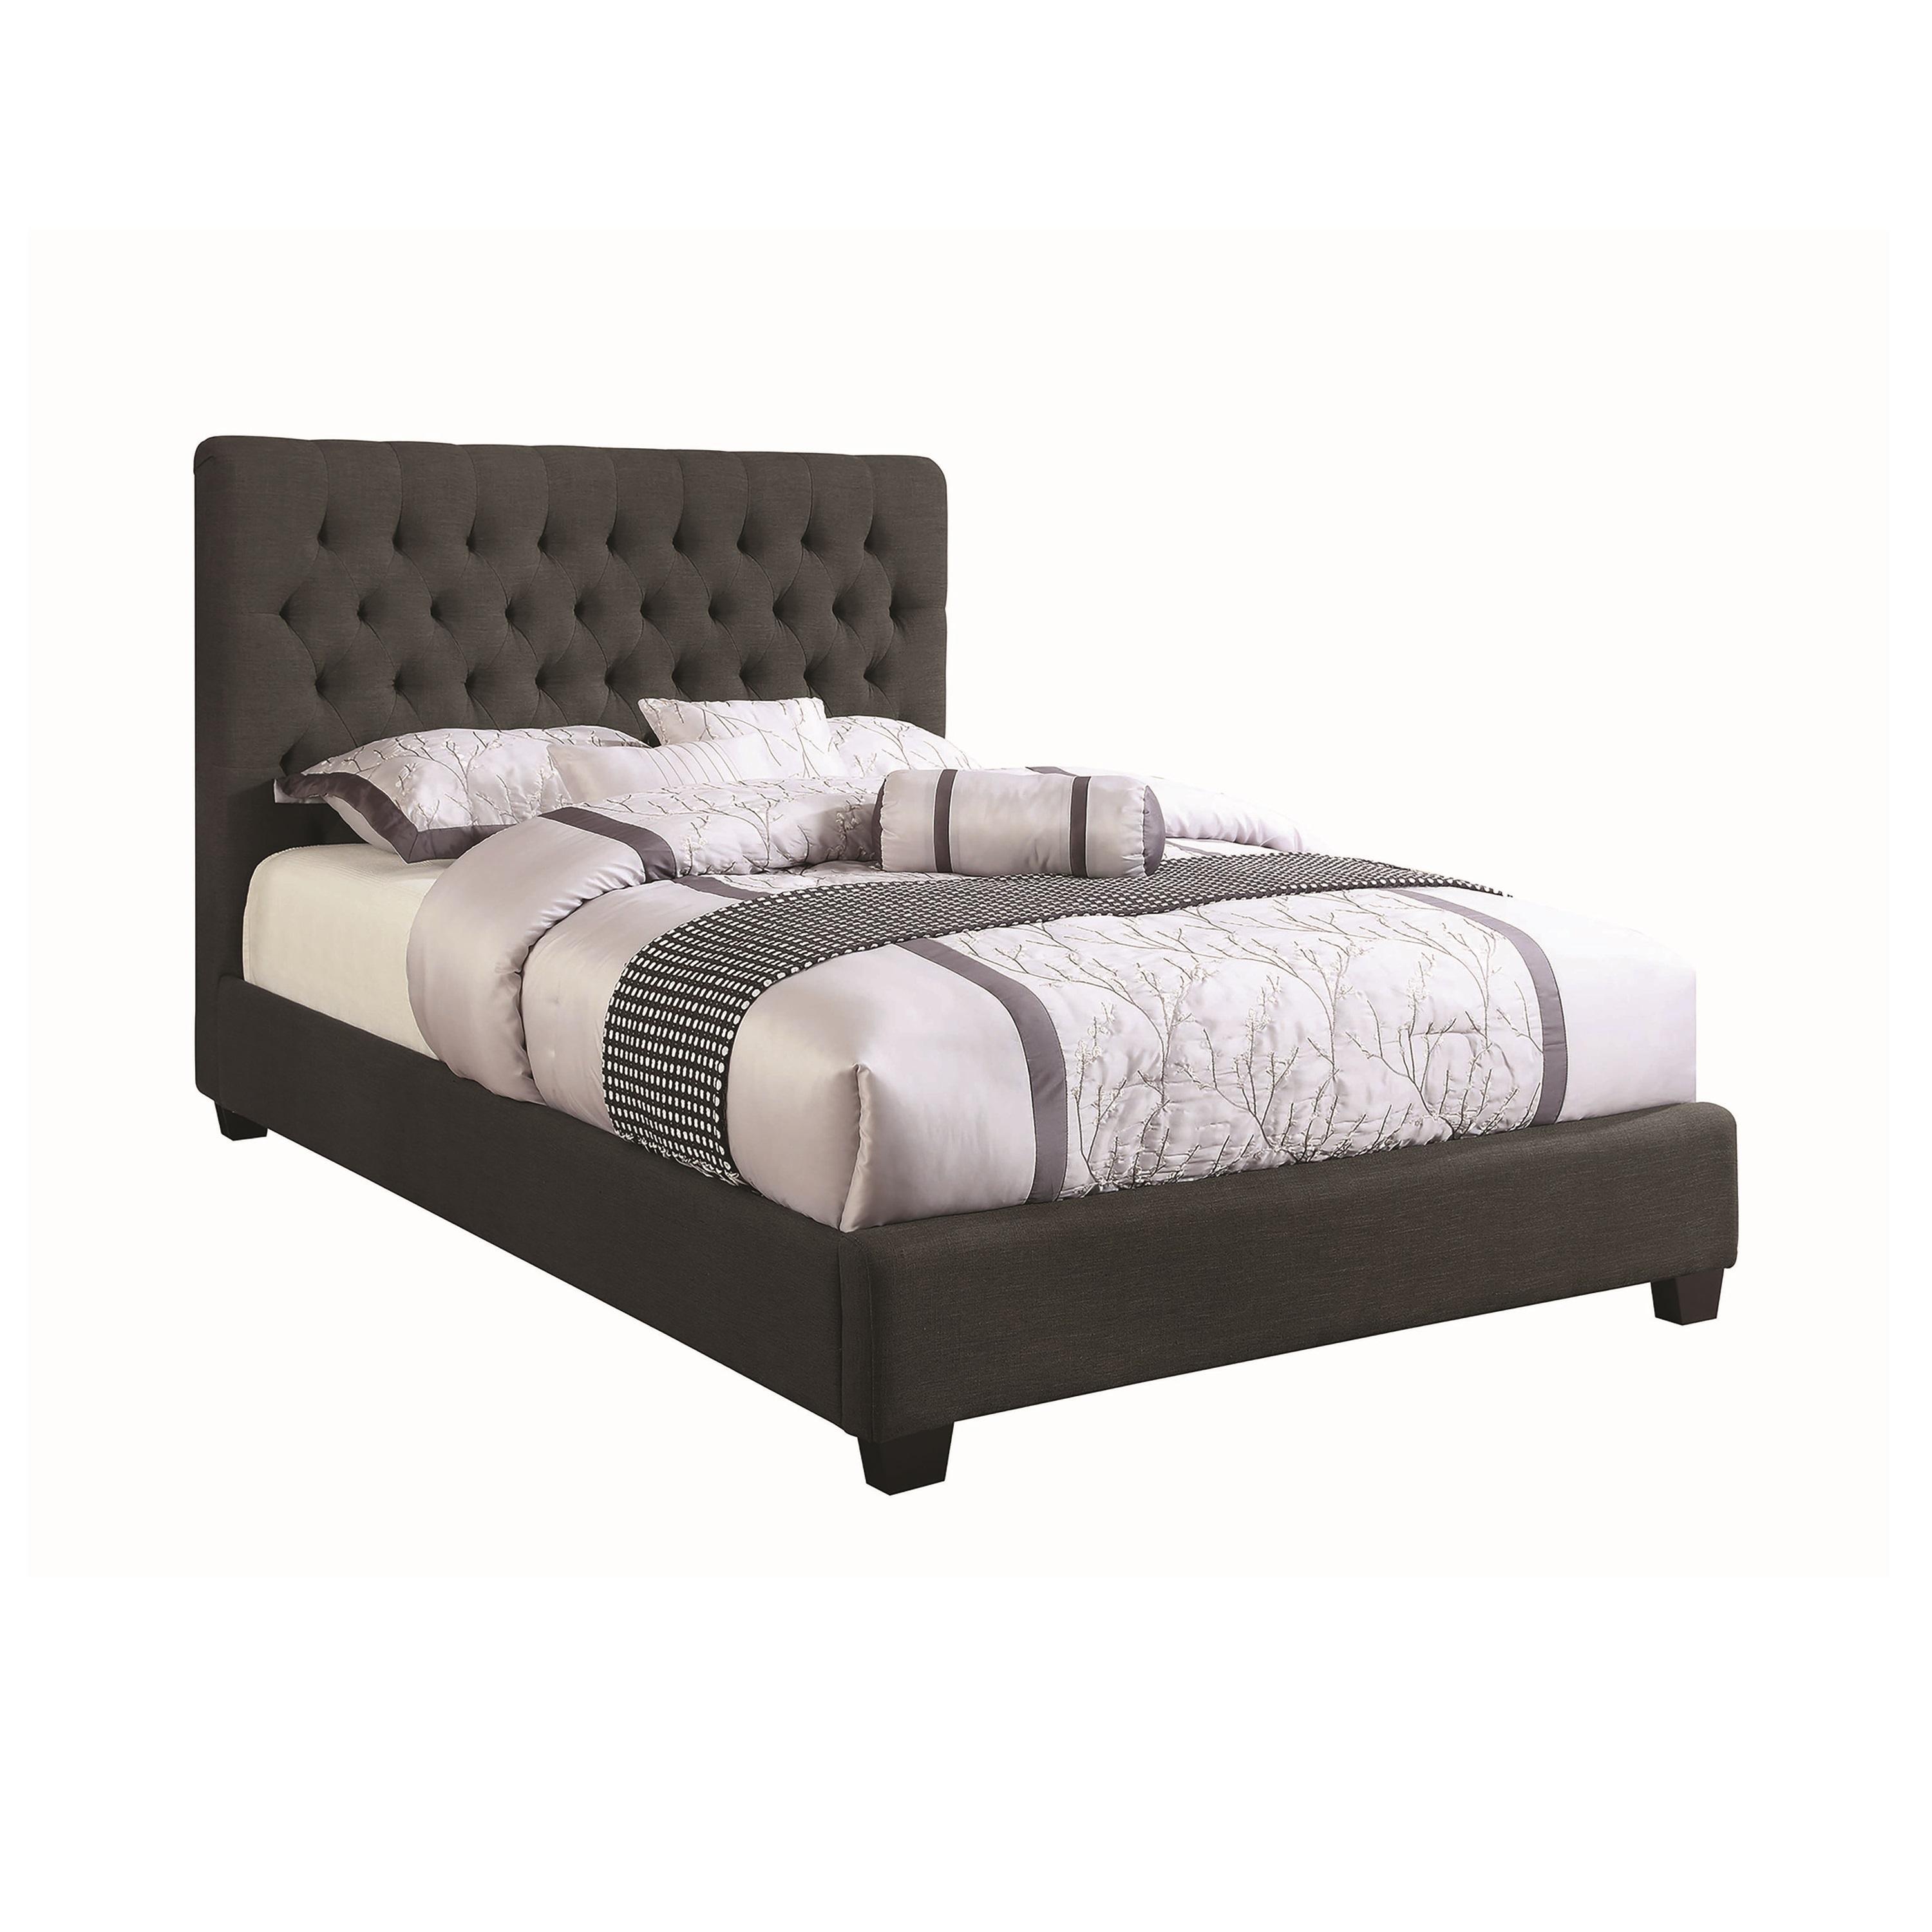 Contemporary Bed 300529Q Chloe 300529Q in Charcoal Fabric